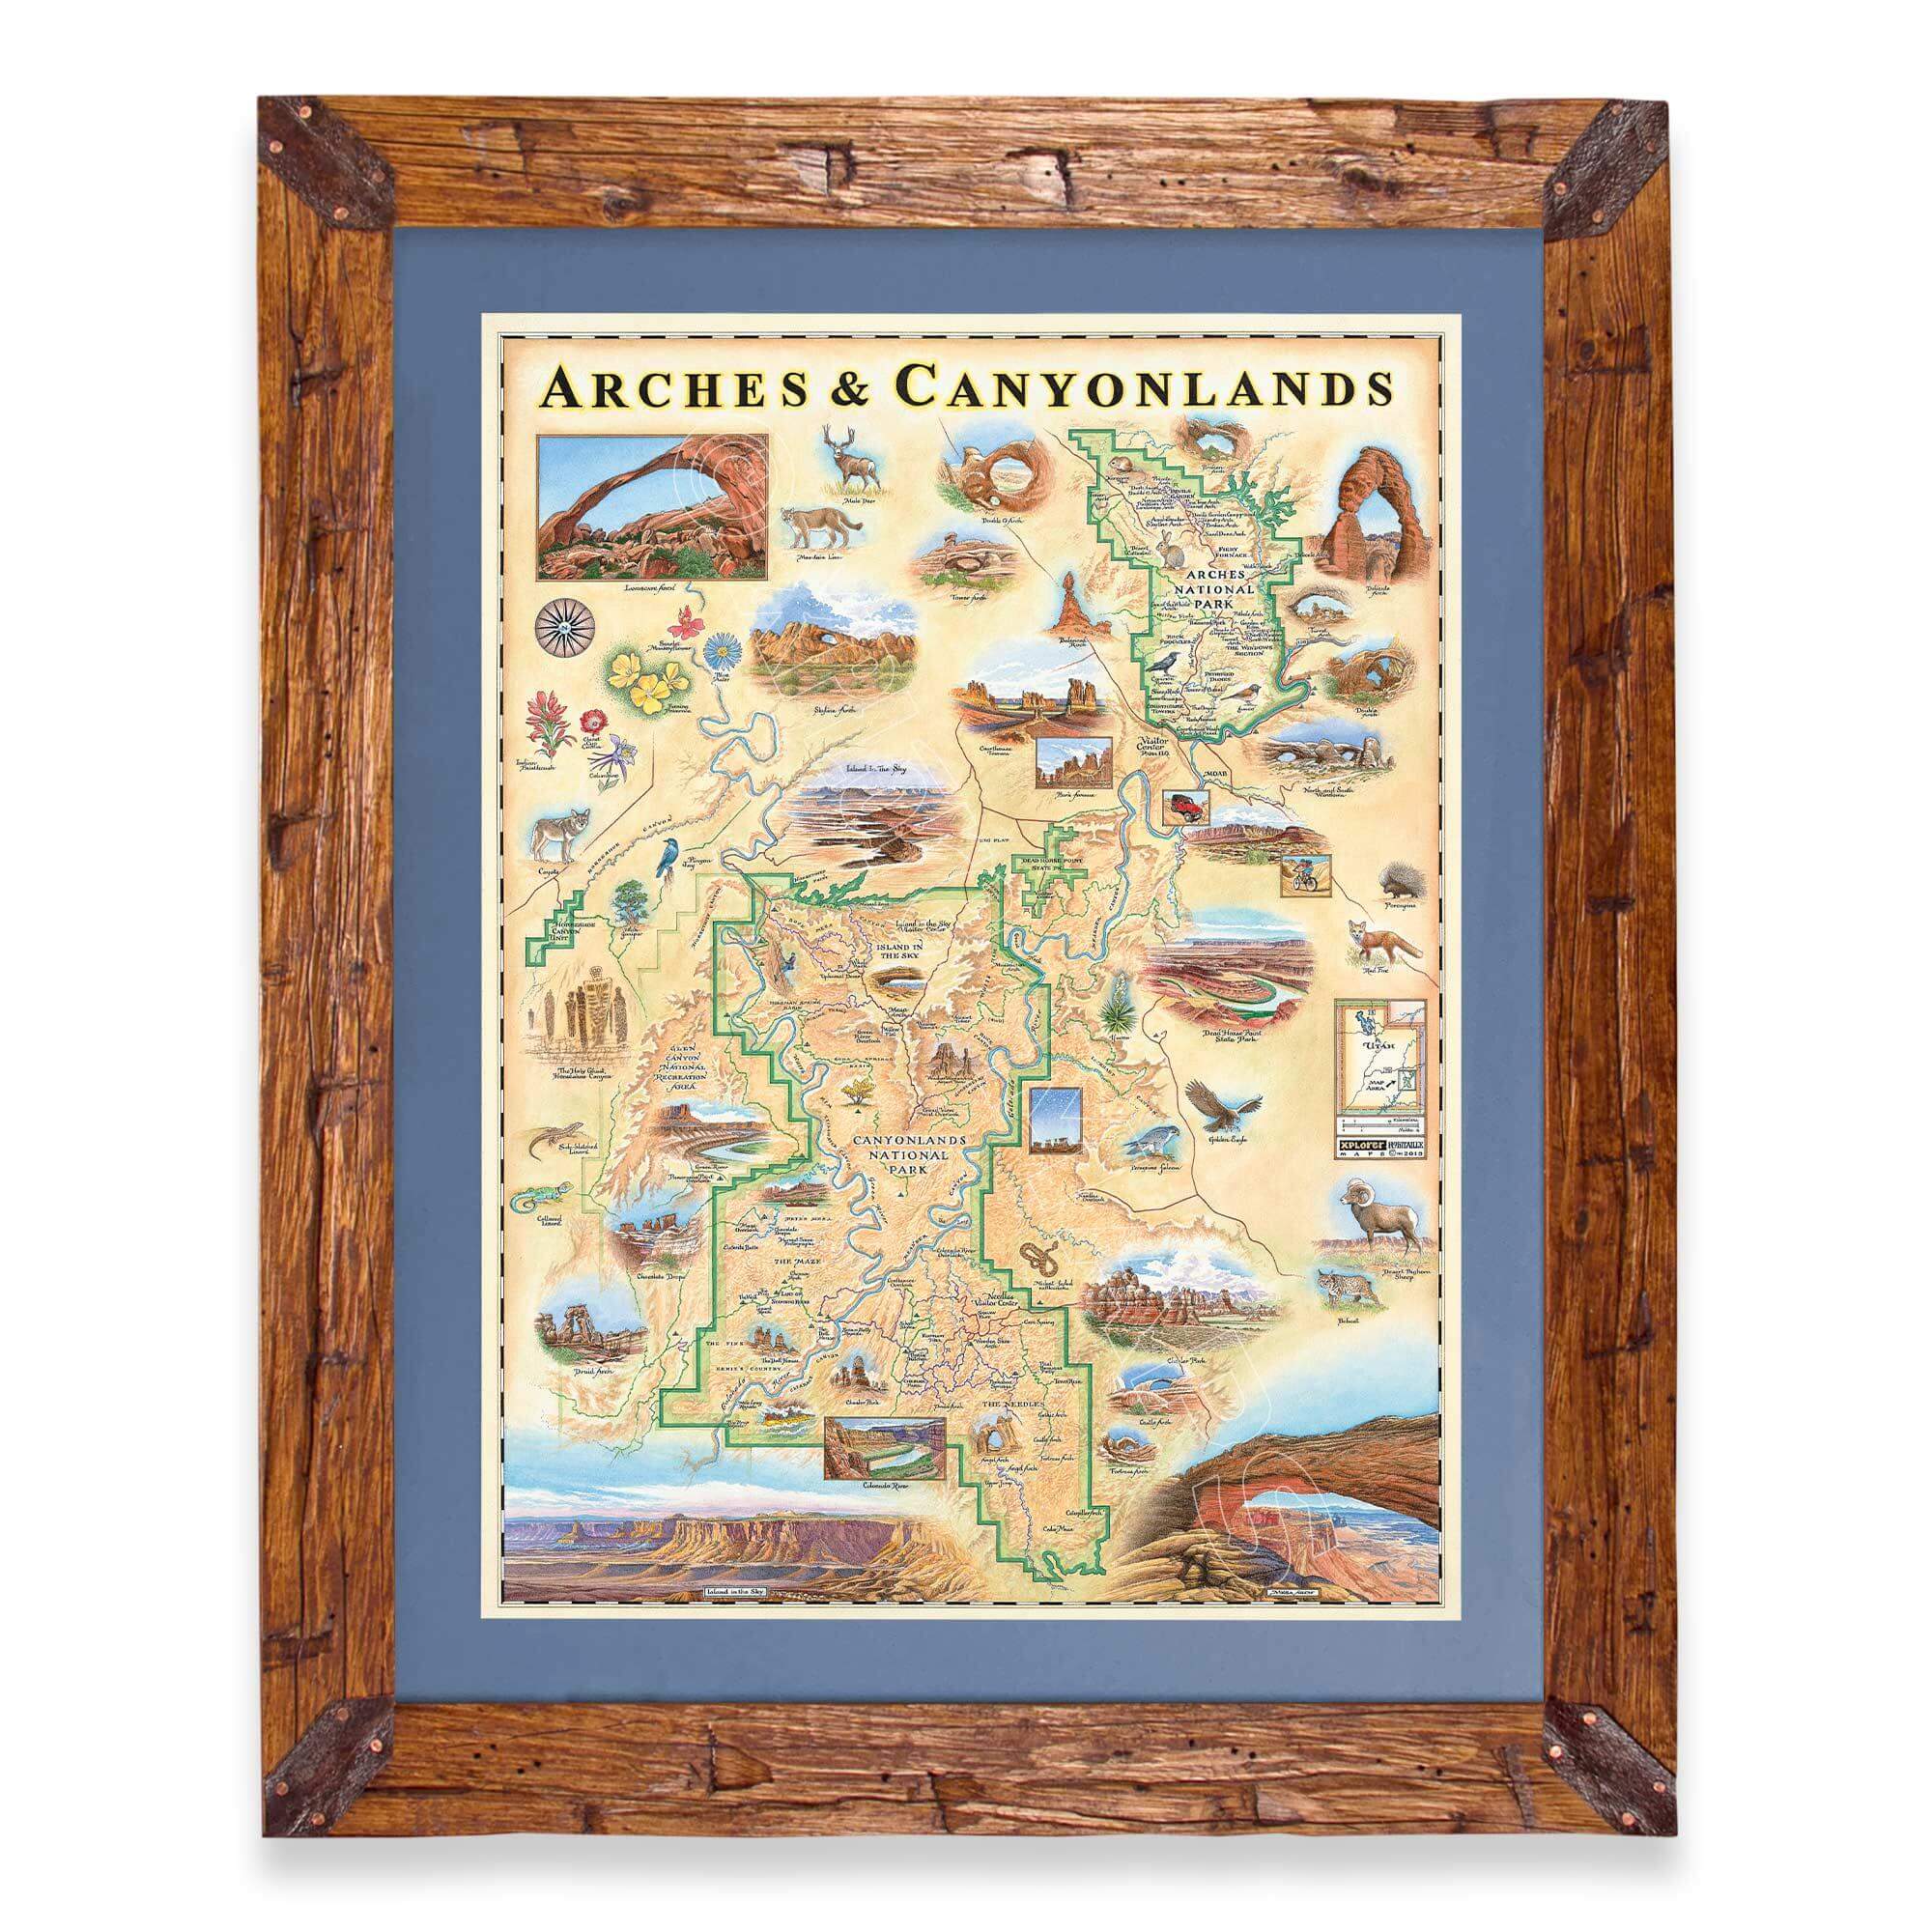 Arches & Canyonlands National Park hand-drawn map in a Montana hand-scraped pine wood frame with blue mat.